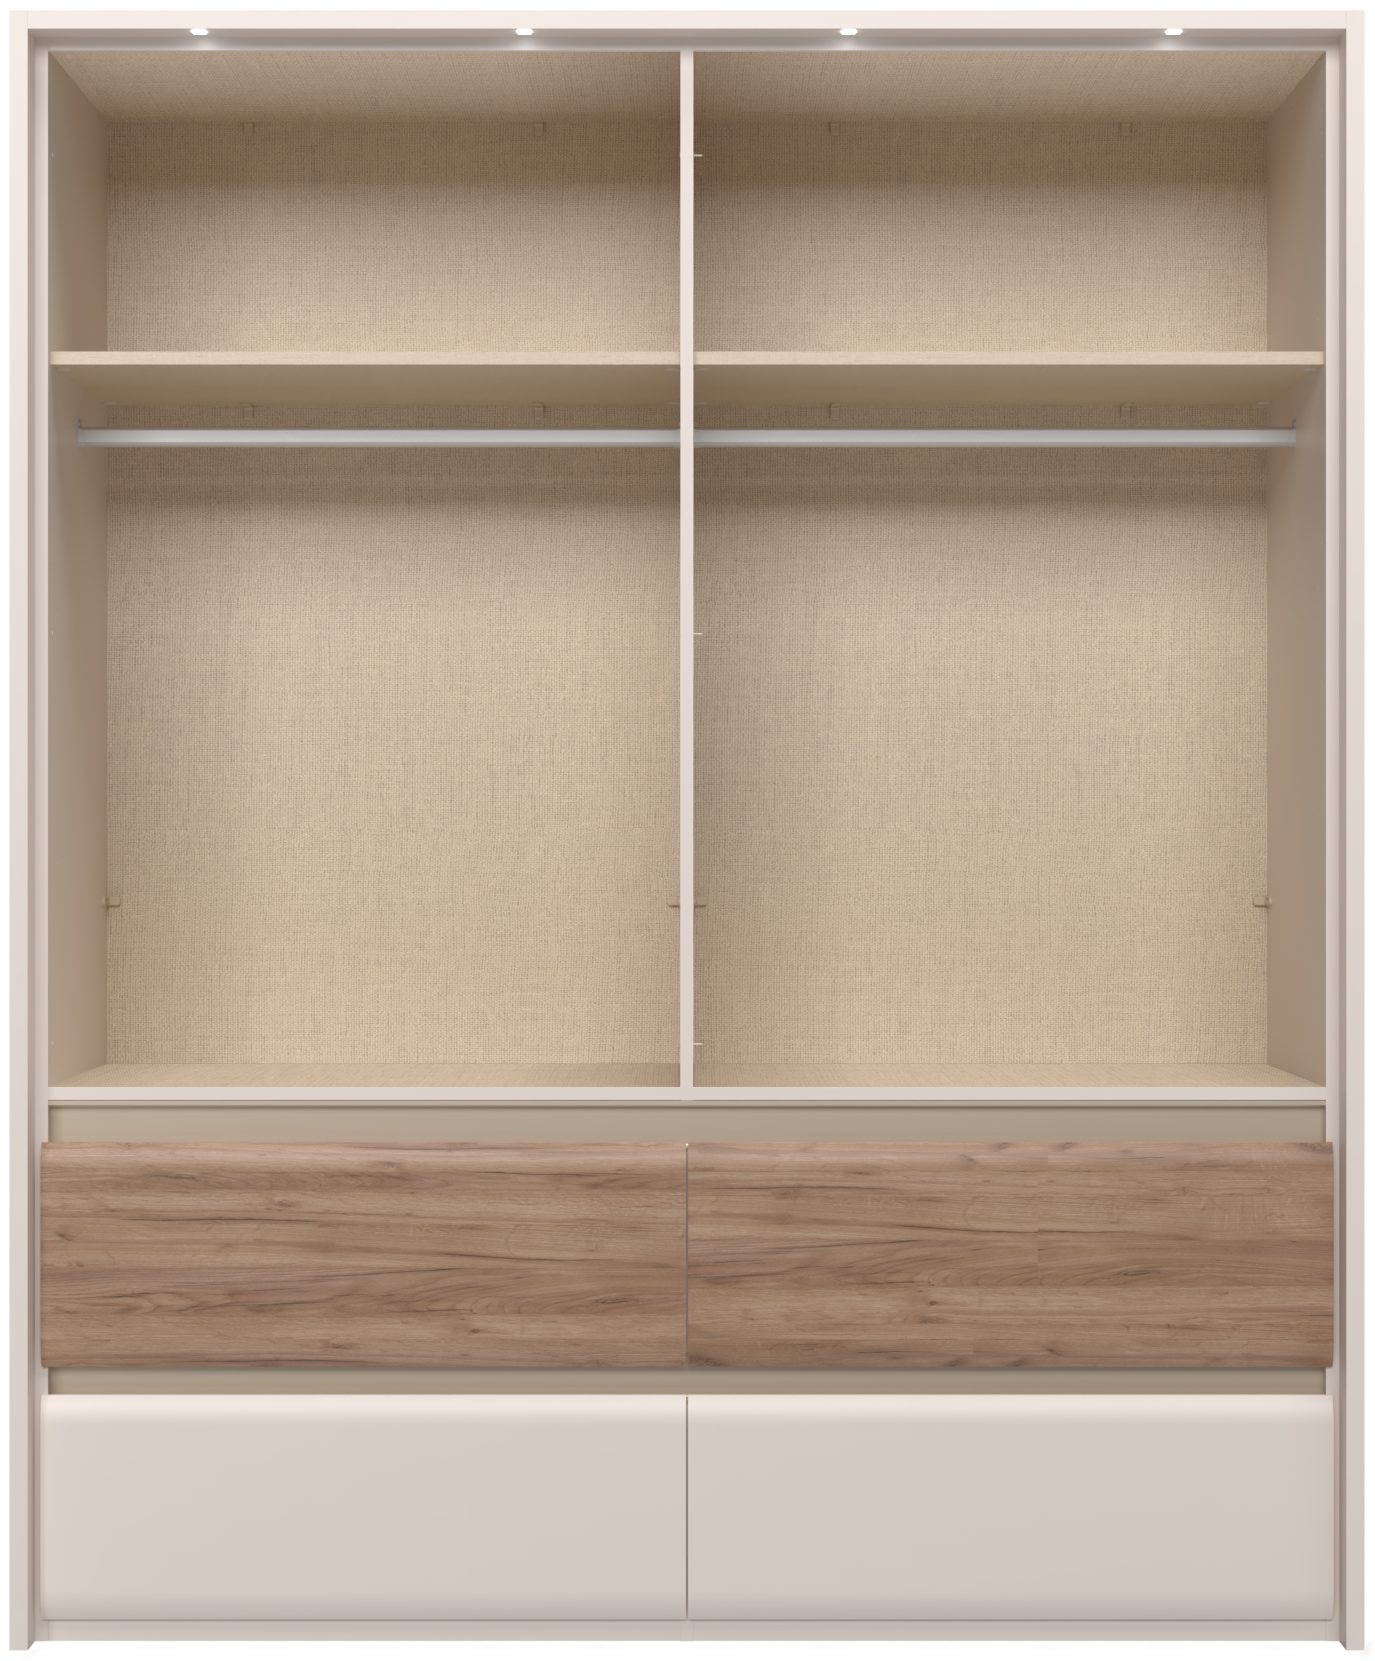 Style Beleuchtung, Funktion Invictus Soft-Close Places LED mit lackiert, of Kleiderschrank UV